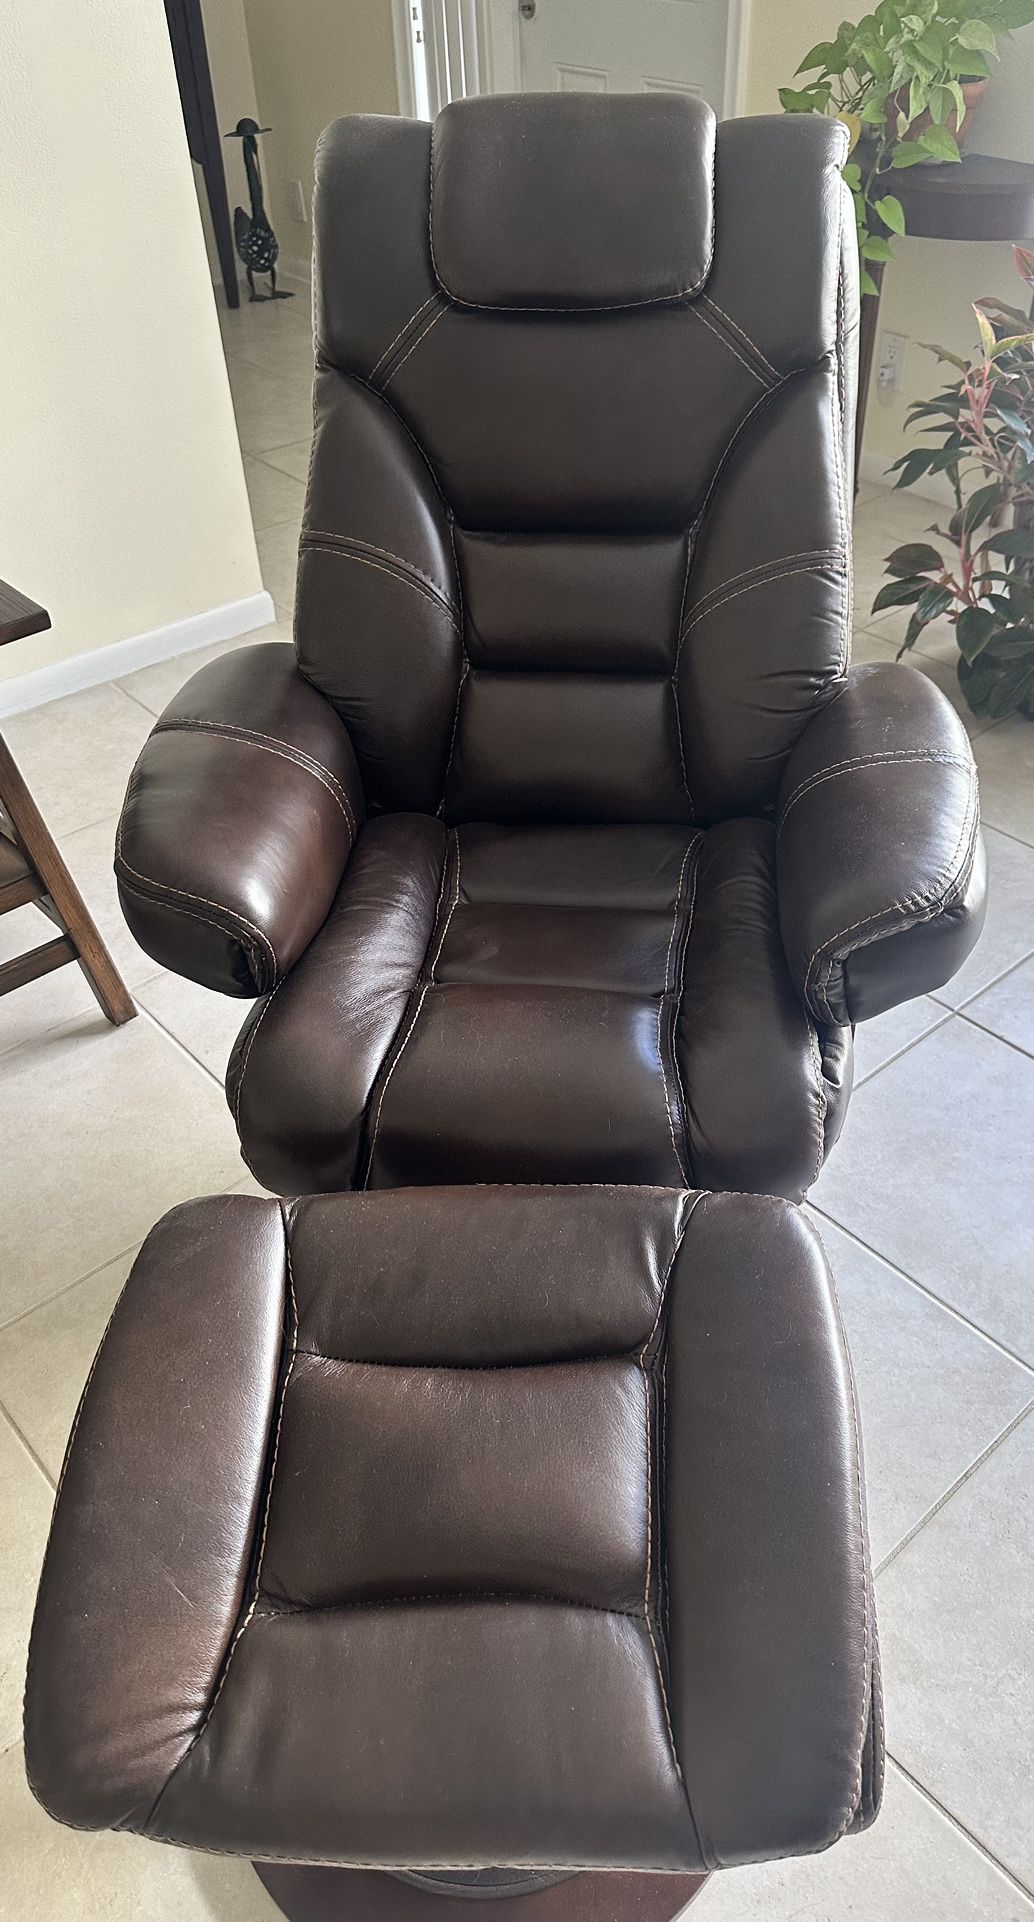 Swivel Recliner With Ottoman 